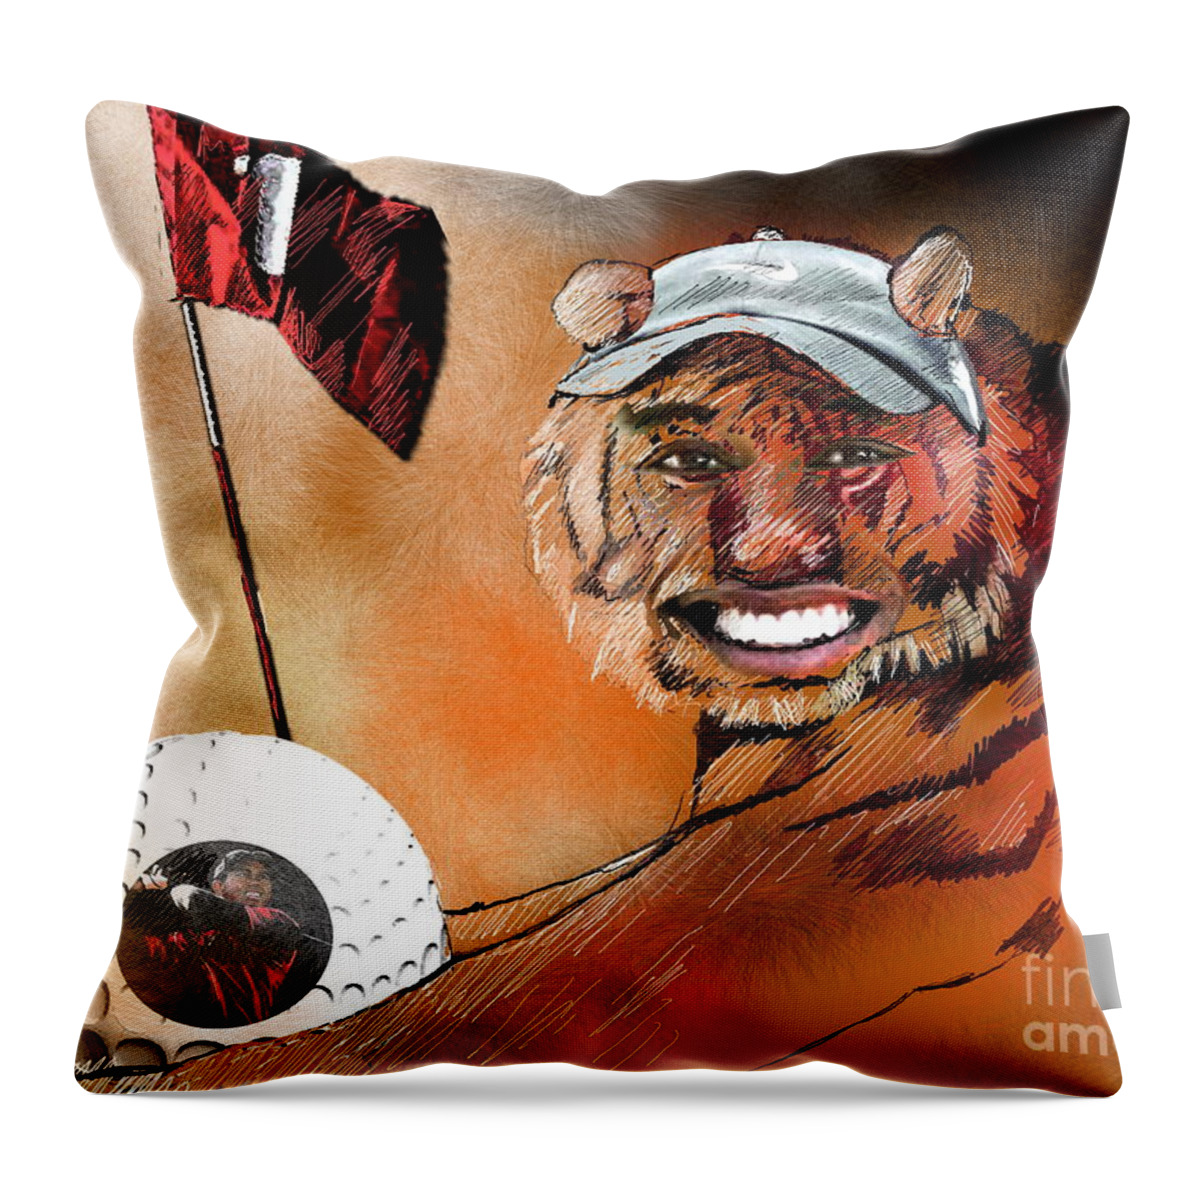 Golf Art Throw Pillow featuring the painting Go for it by Miki De Goodaboom